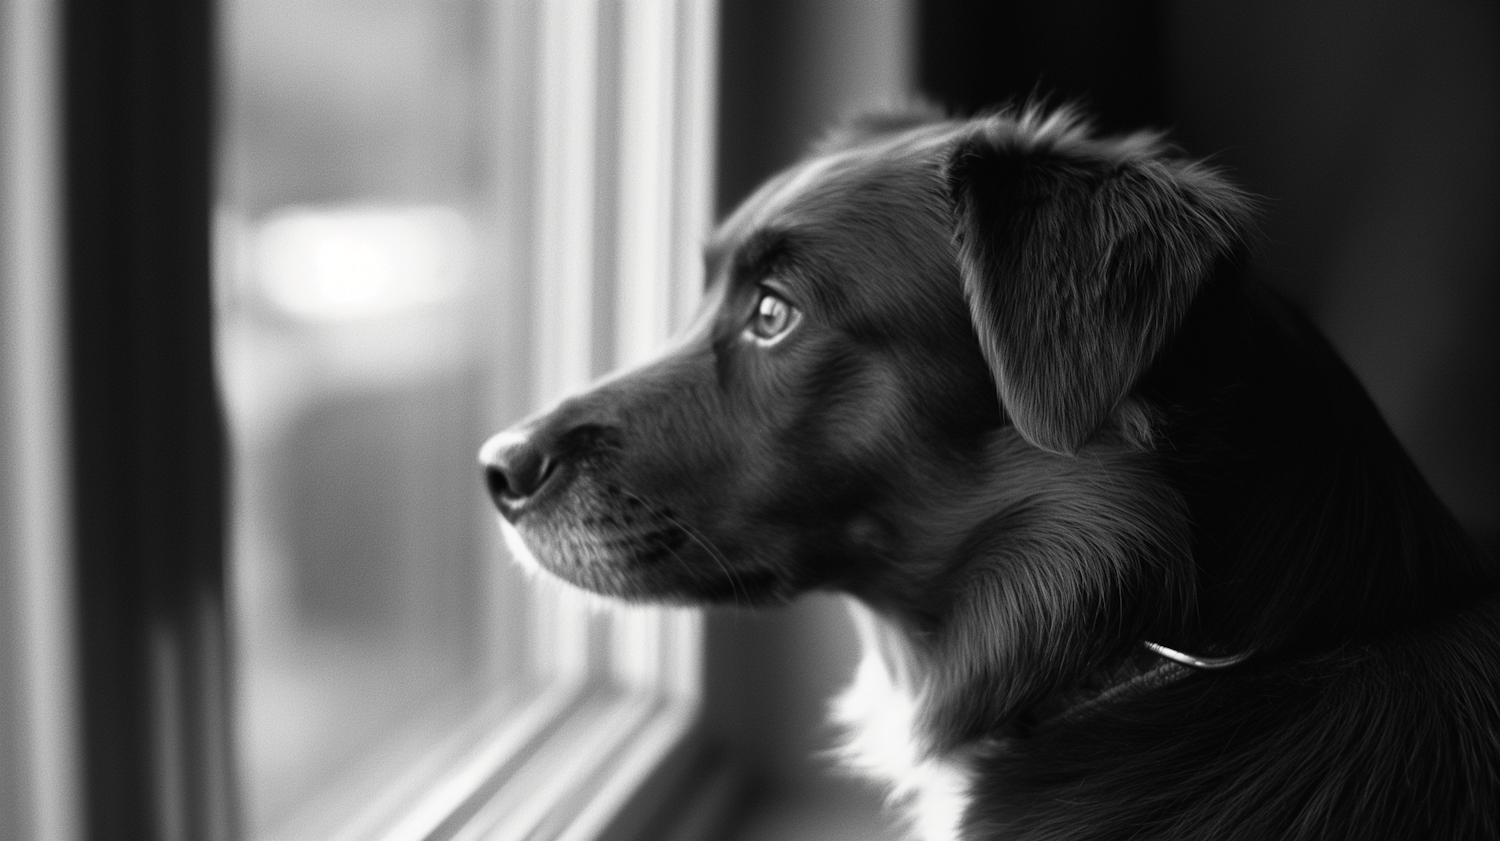 Contemplative Dog at the Window